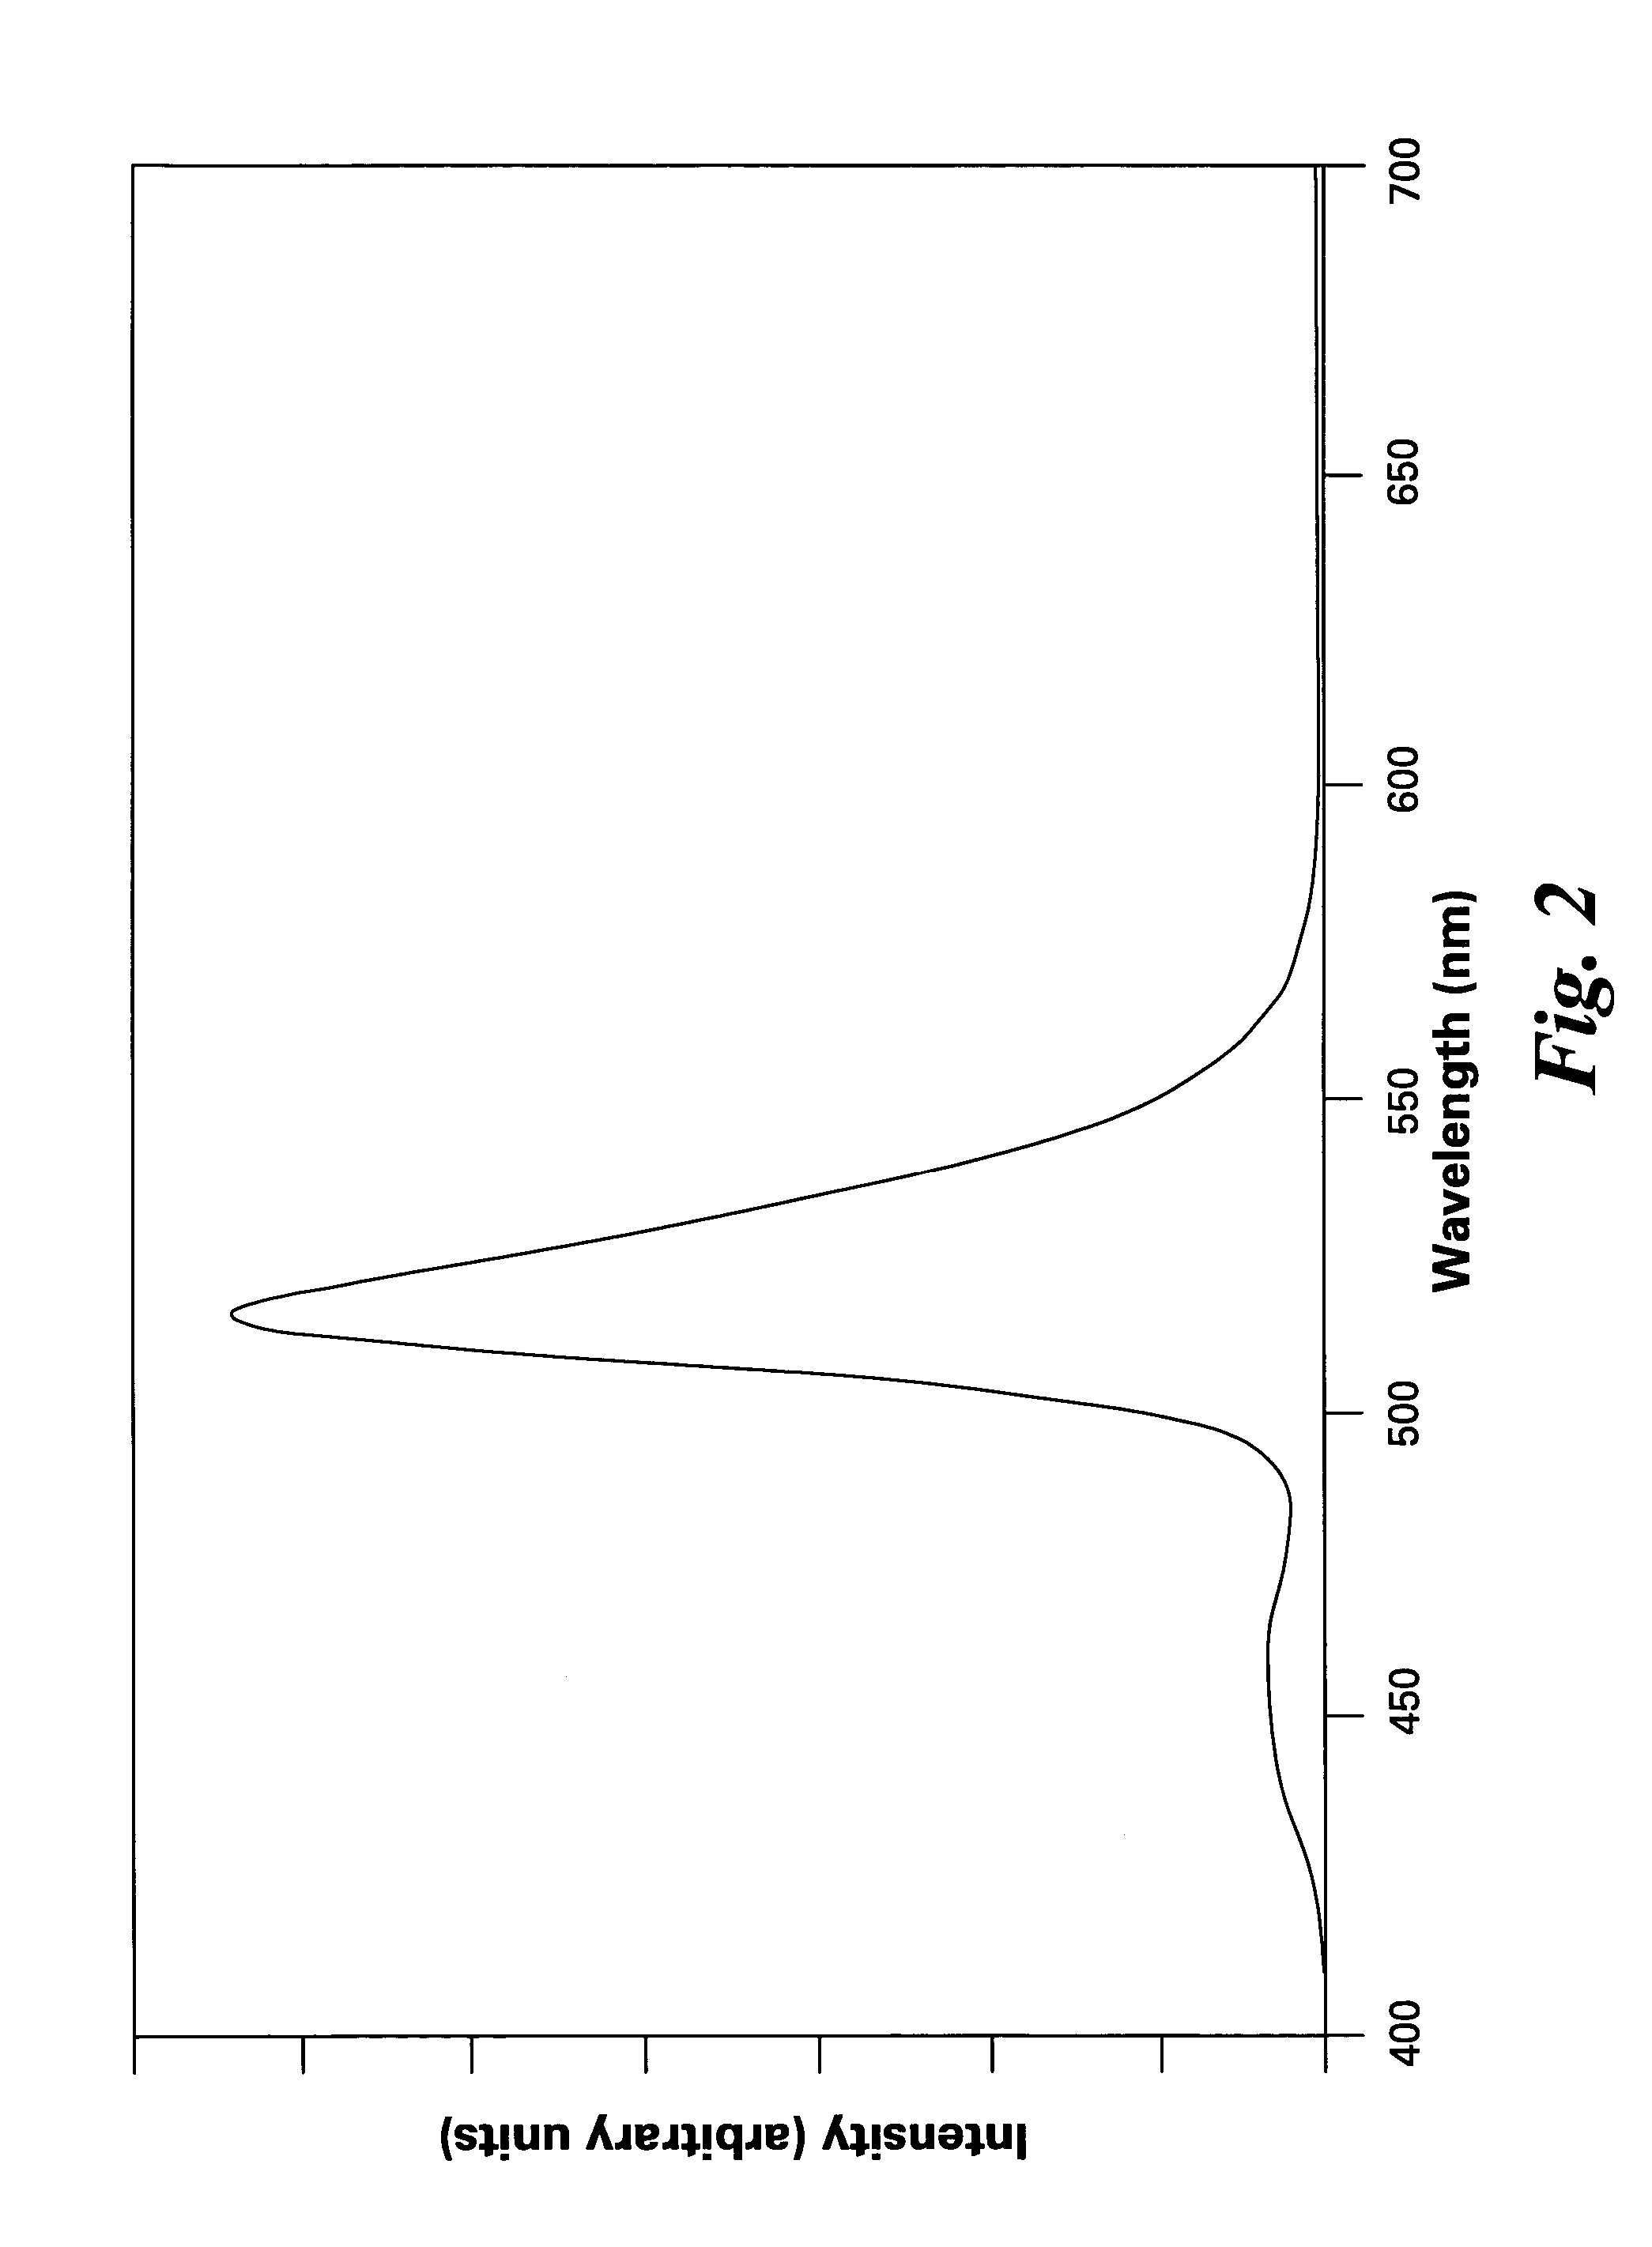 Phosphors containing oxides of alkaline-earth and group-IIIB metals and white-light sources incorporating same